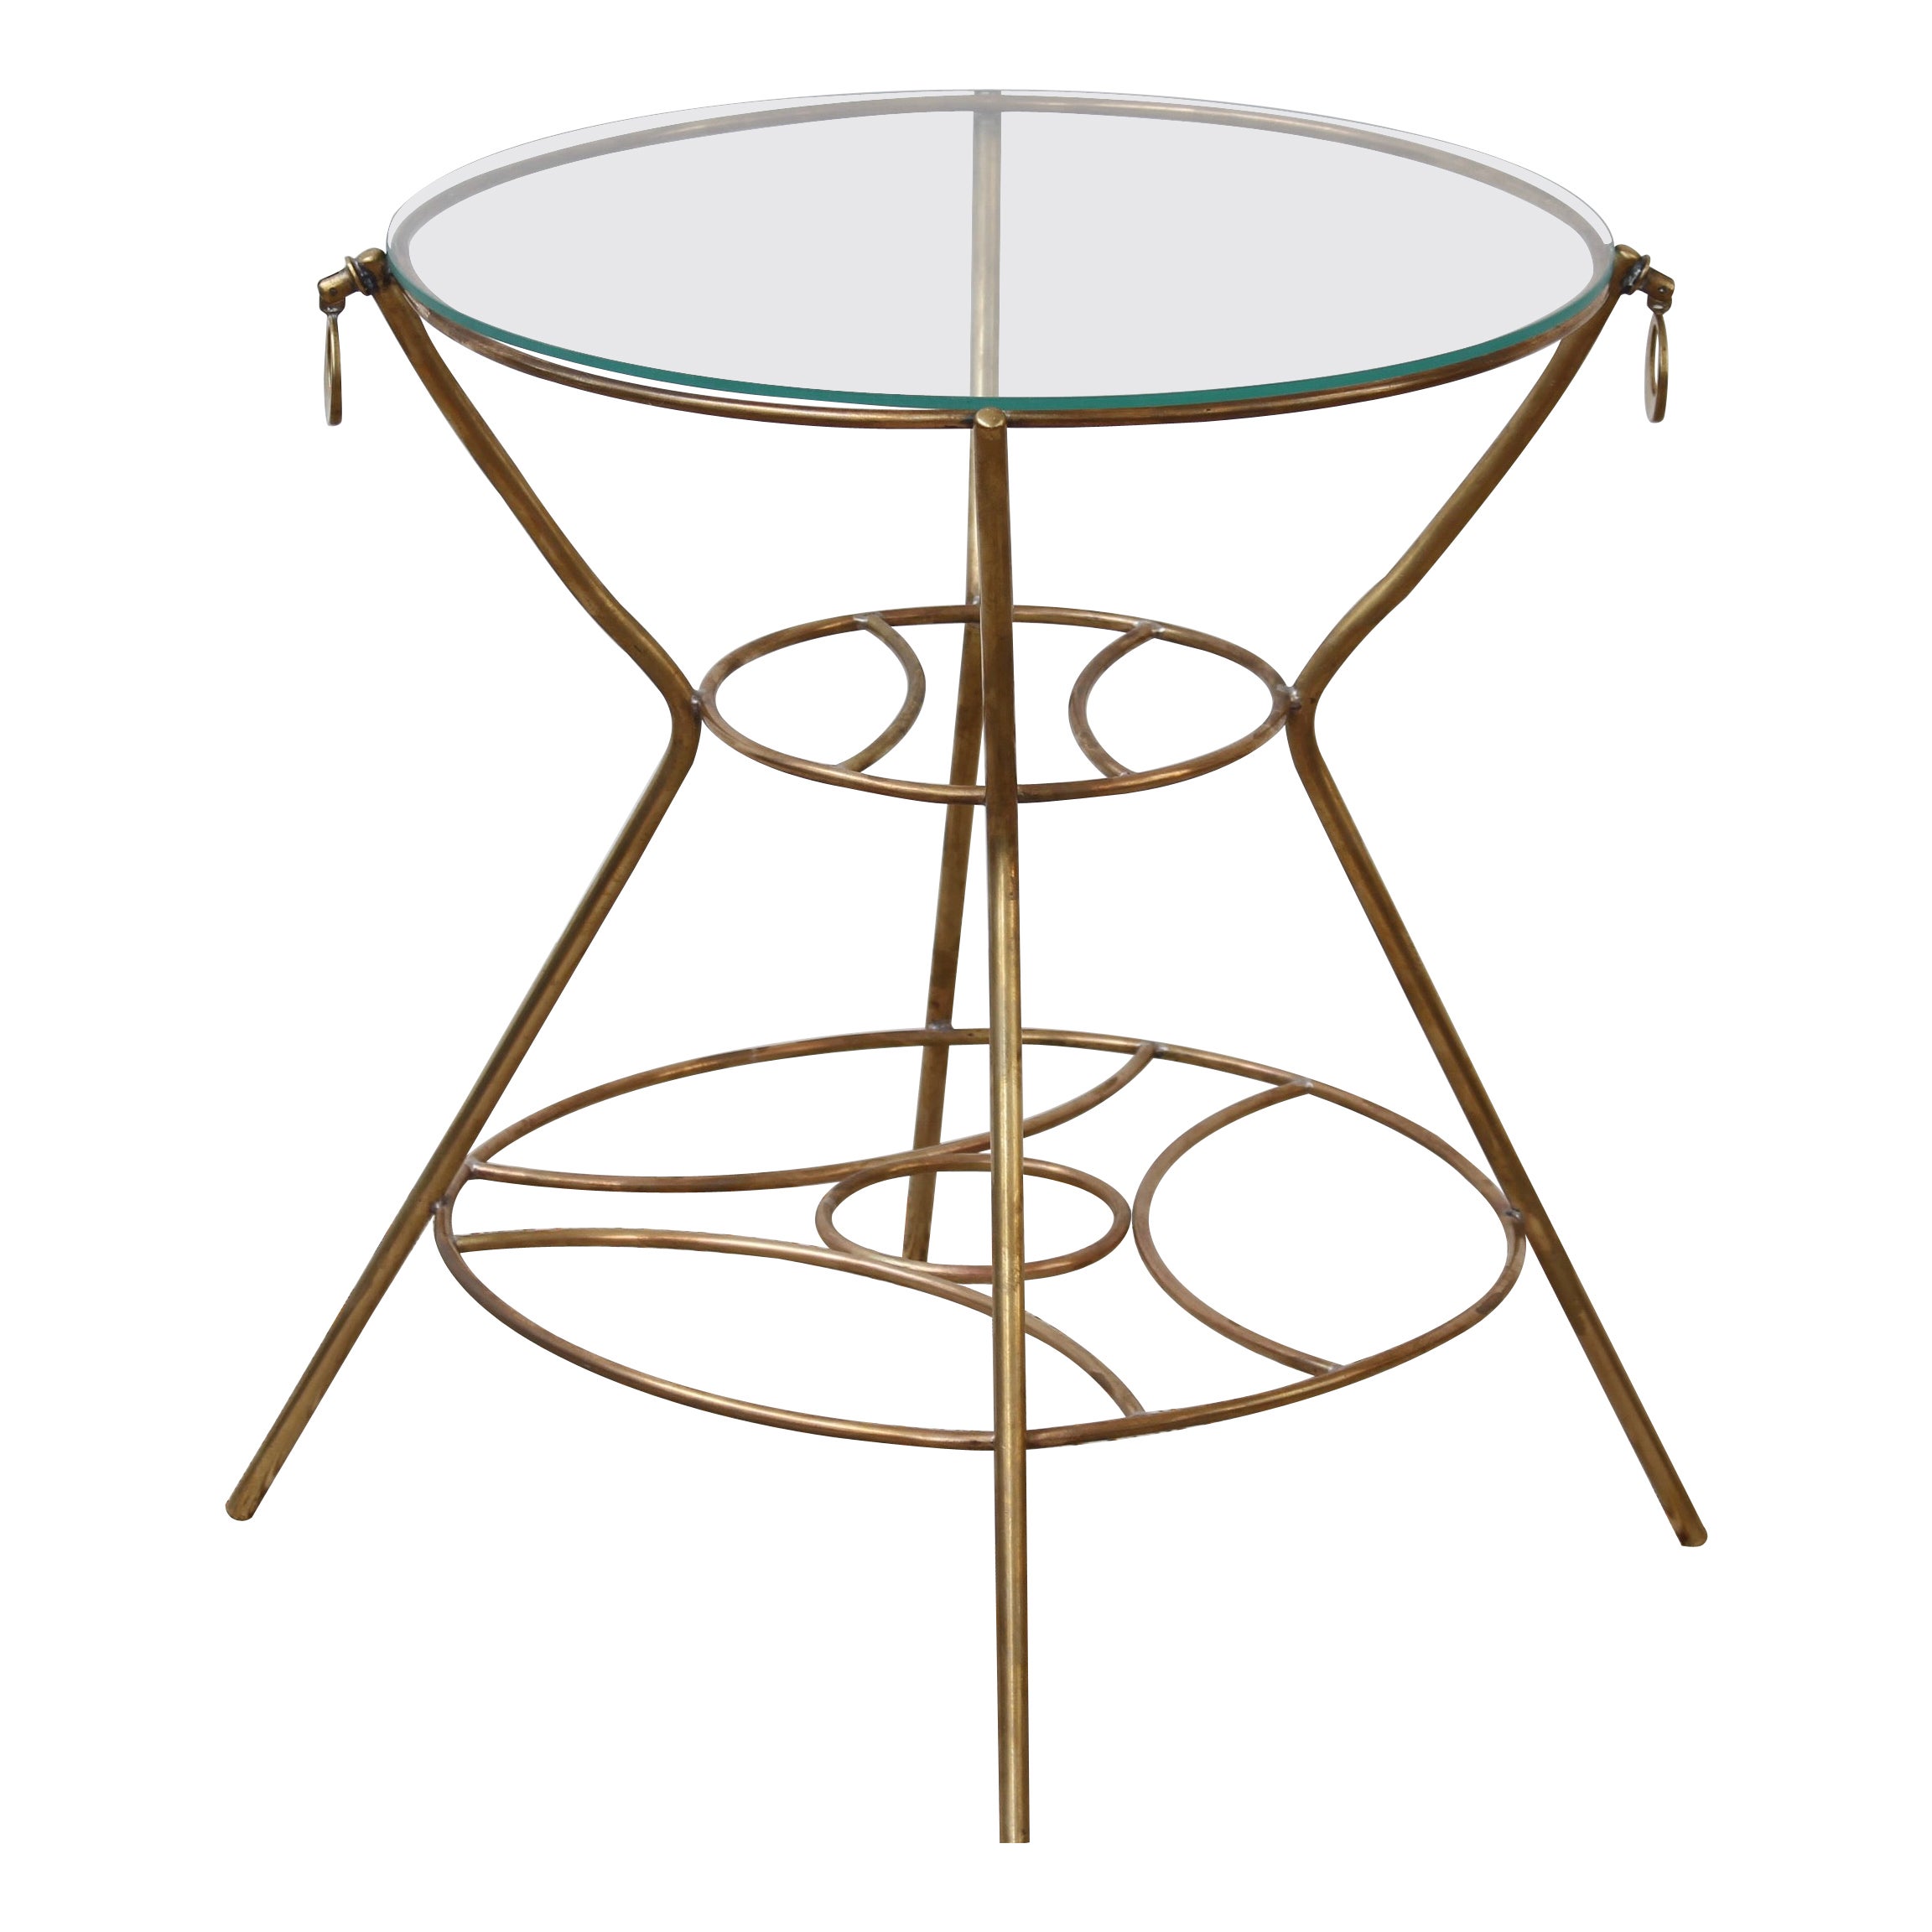 Vintage Italian Side Table with Brass Legs and Glass Top 'circa 1960s'